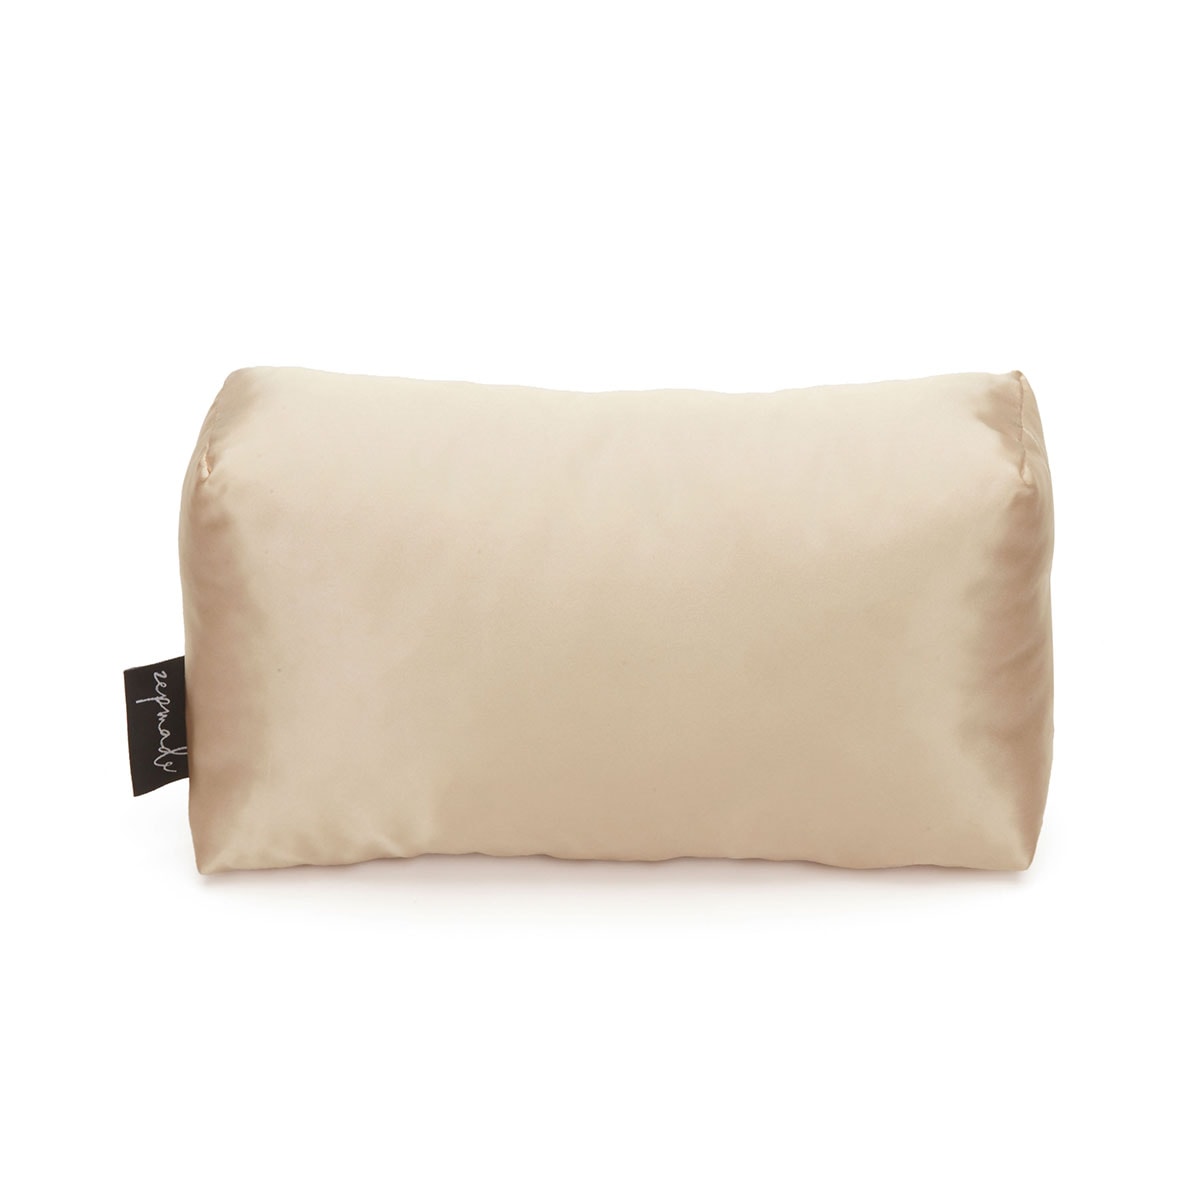 Purse Insert Pillows for Flap Handbags, Shaper Forms for all the 19,  Reissue, Boy, & Classic Bags, Best Purse Storage